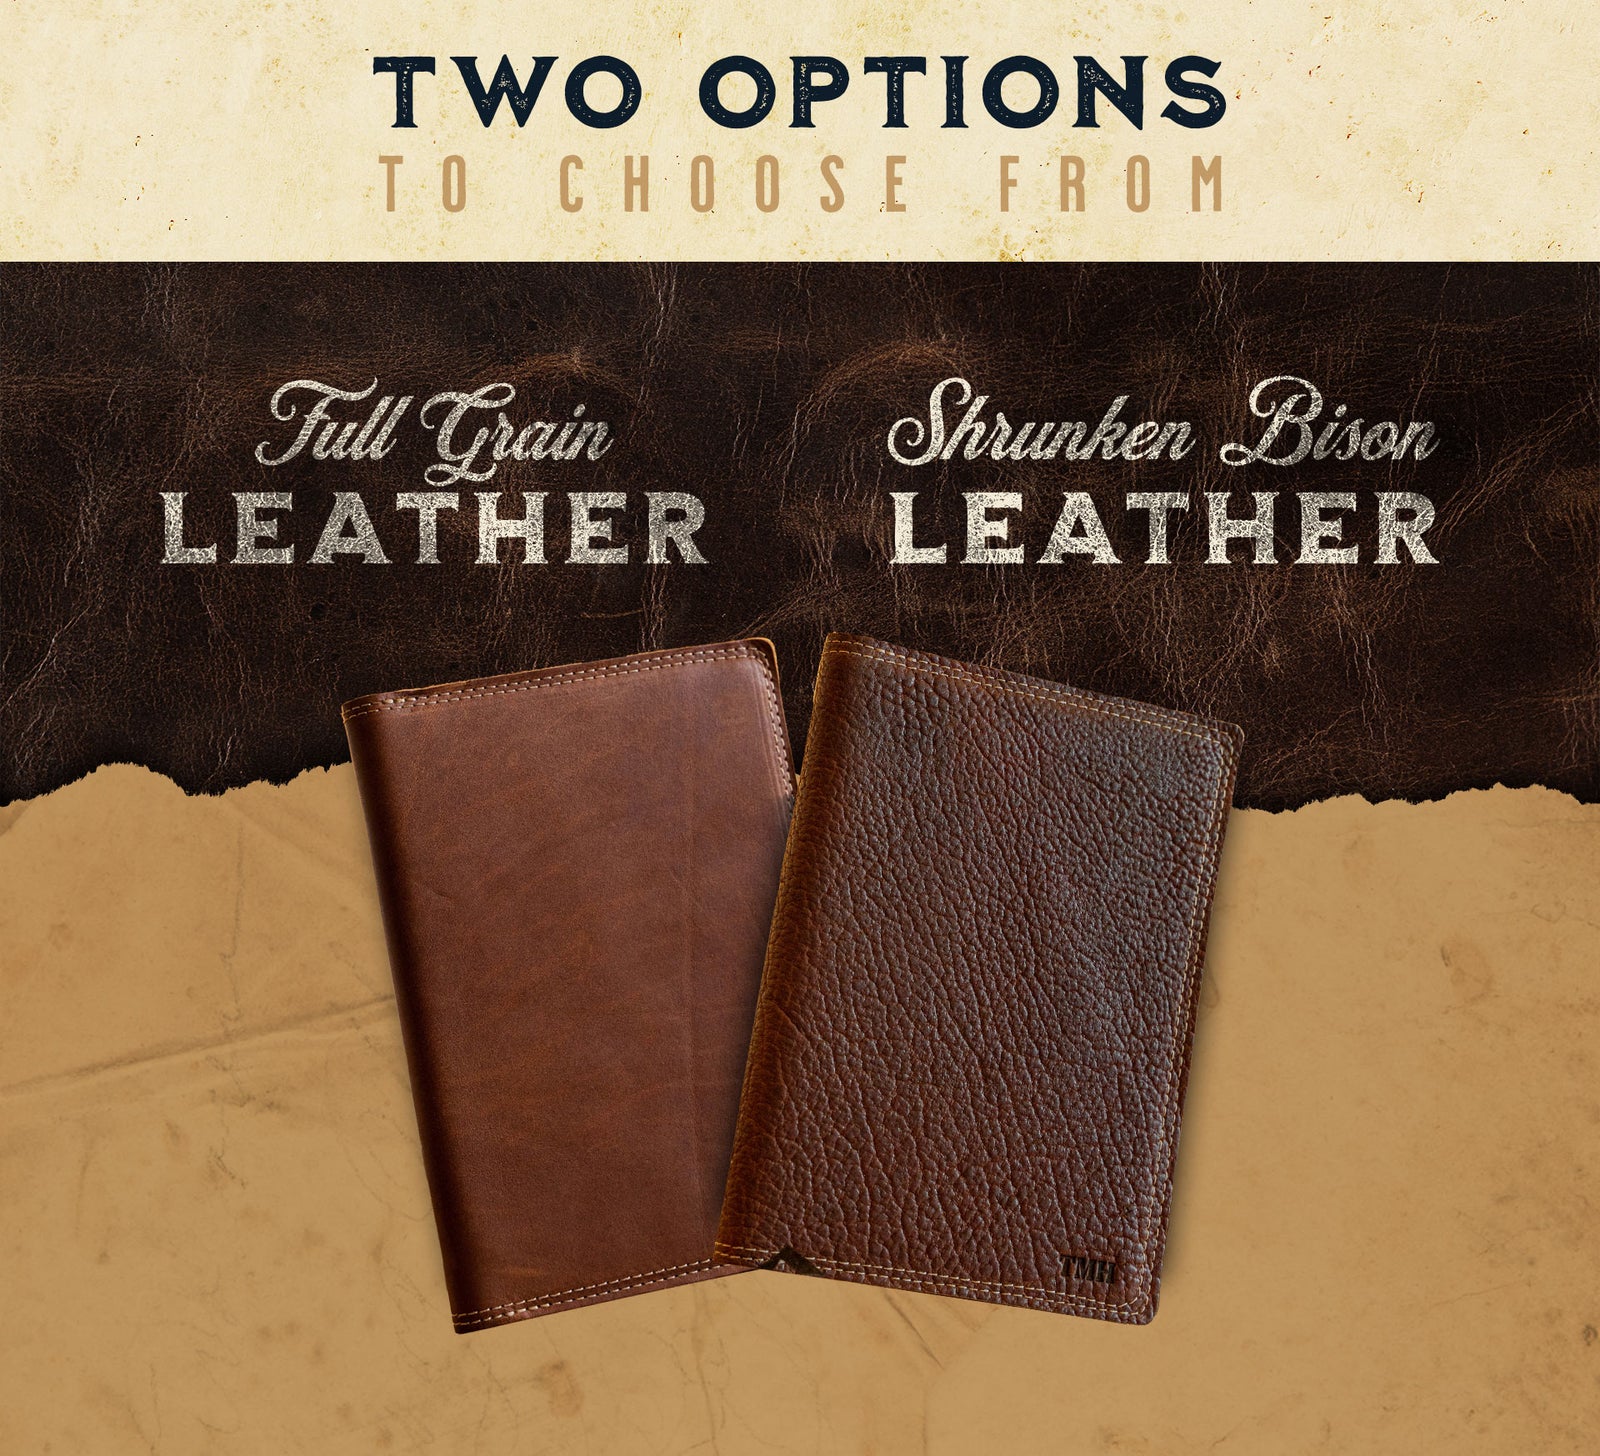 Full Grain Leather Journal with YOUR LOGO, Corporate Gifting made